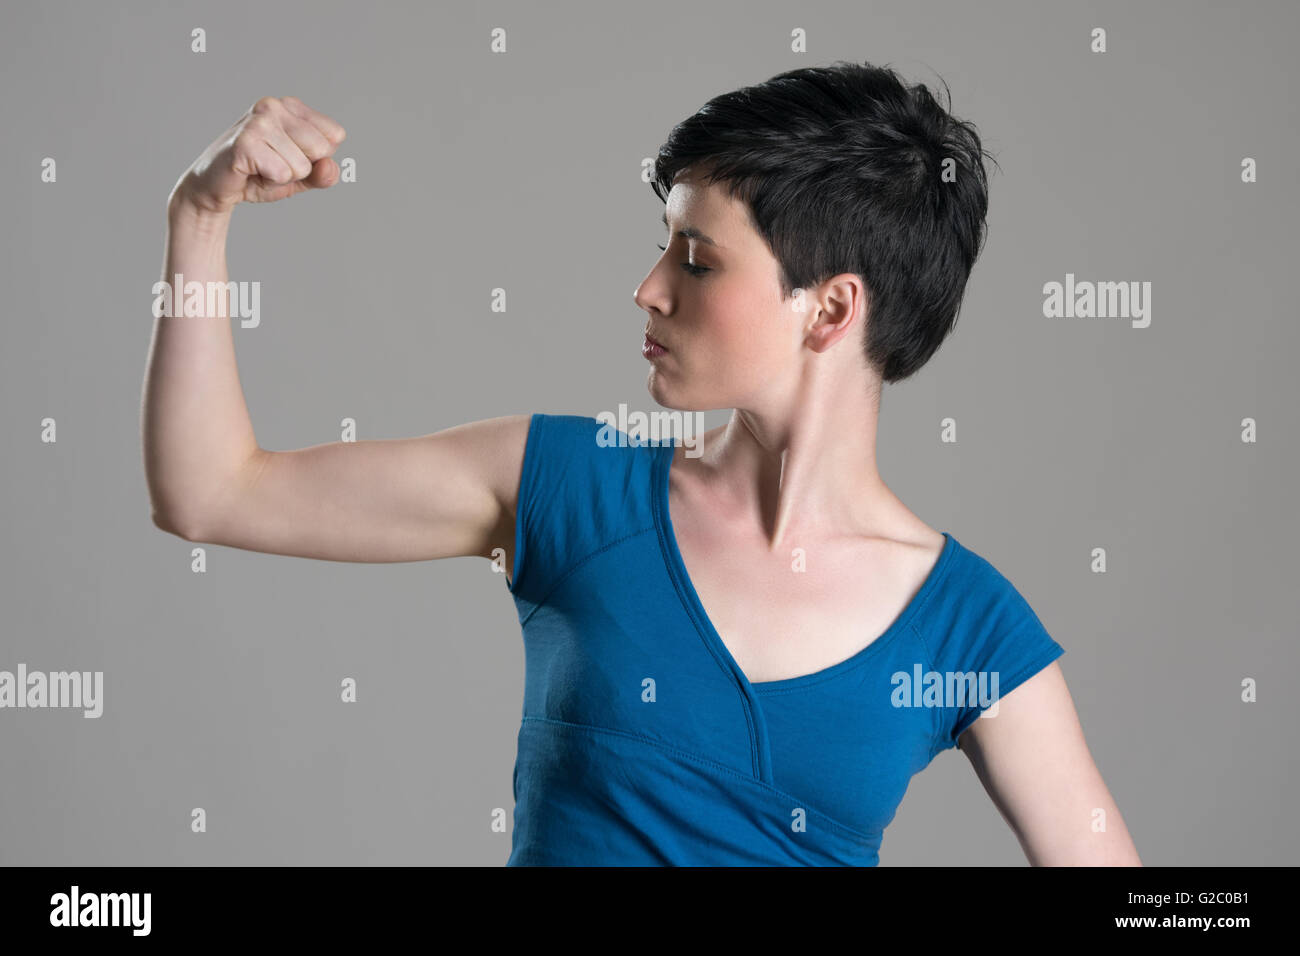 Slim young short hair woman flexing arm bicep muscle over gray studio background. Stock Photo